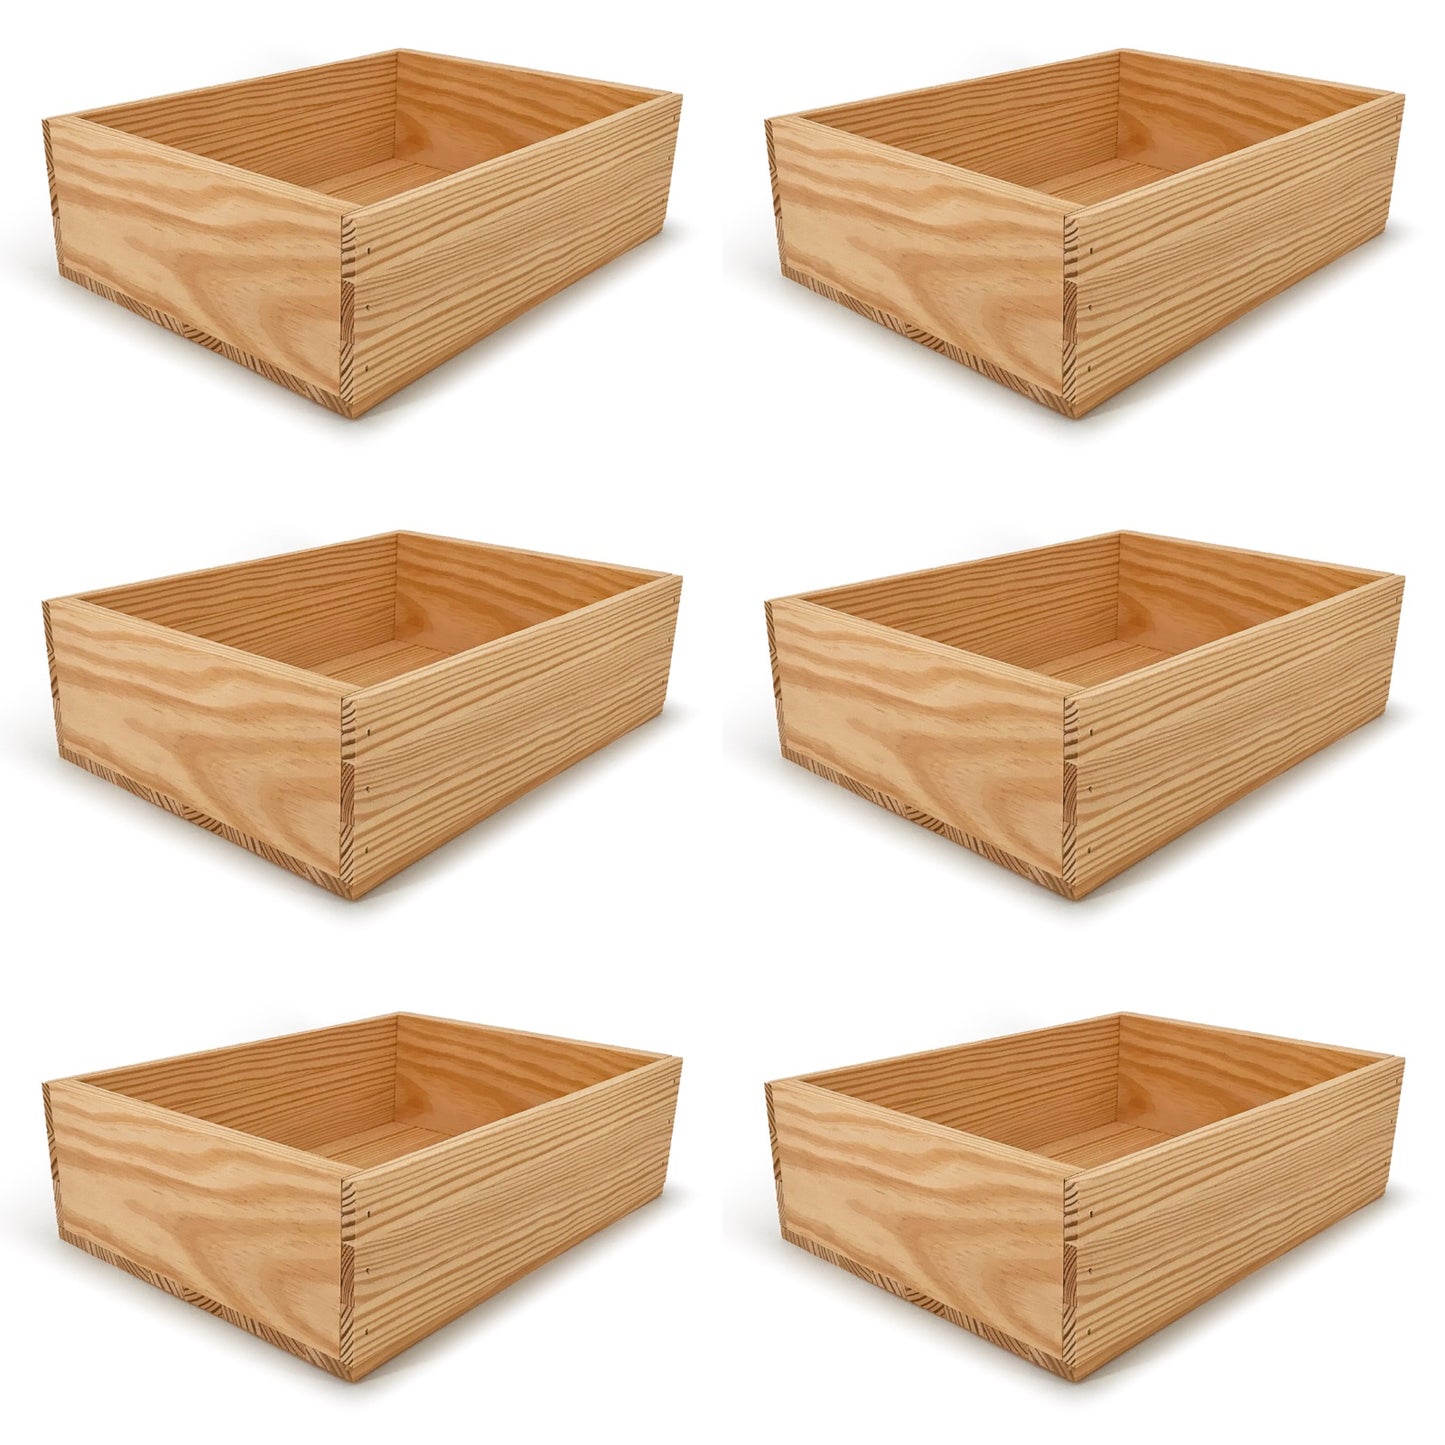 6 Small wooden crates 14x10x4.25